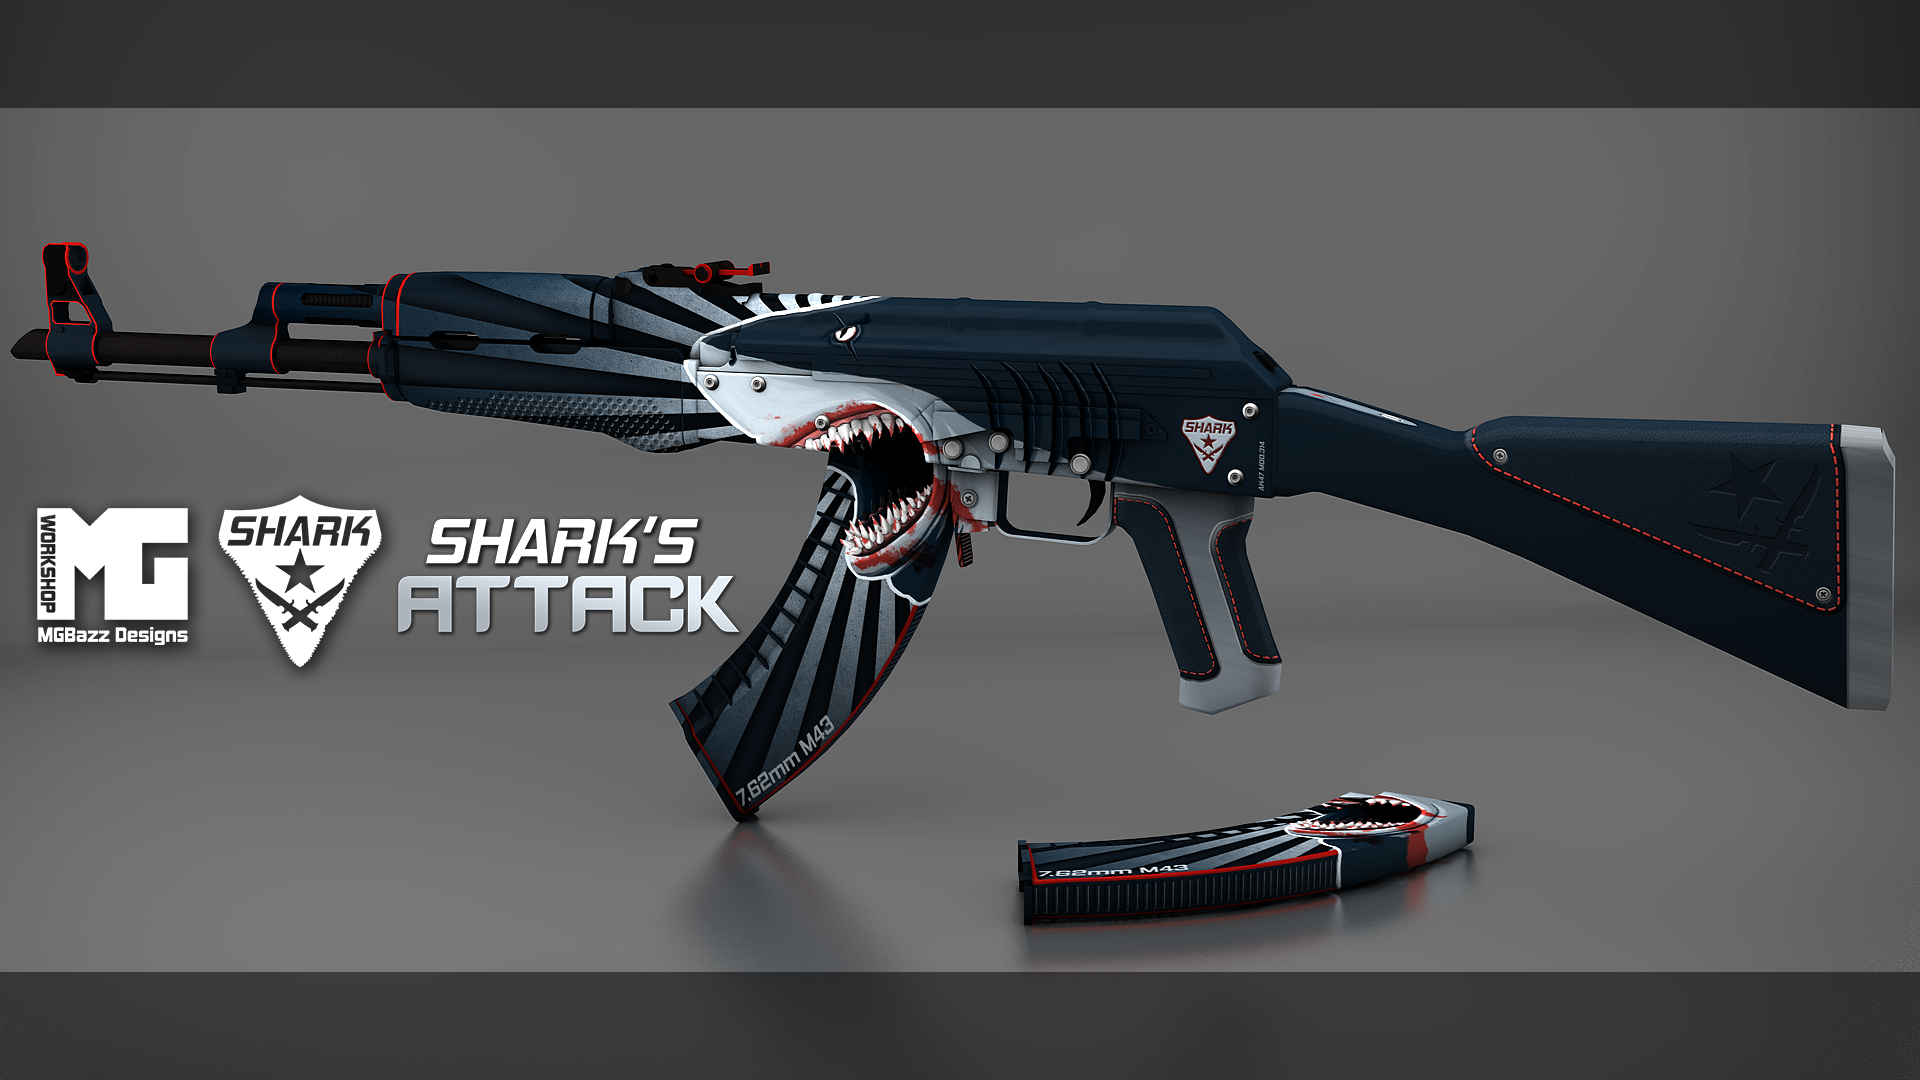 1920x1080 Shark's Collection Digital Painting Polycount - Painting Ak 47...